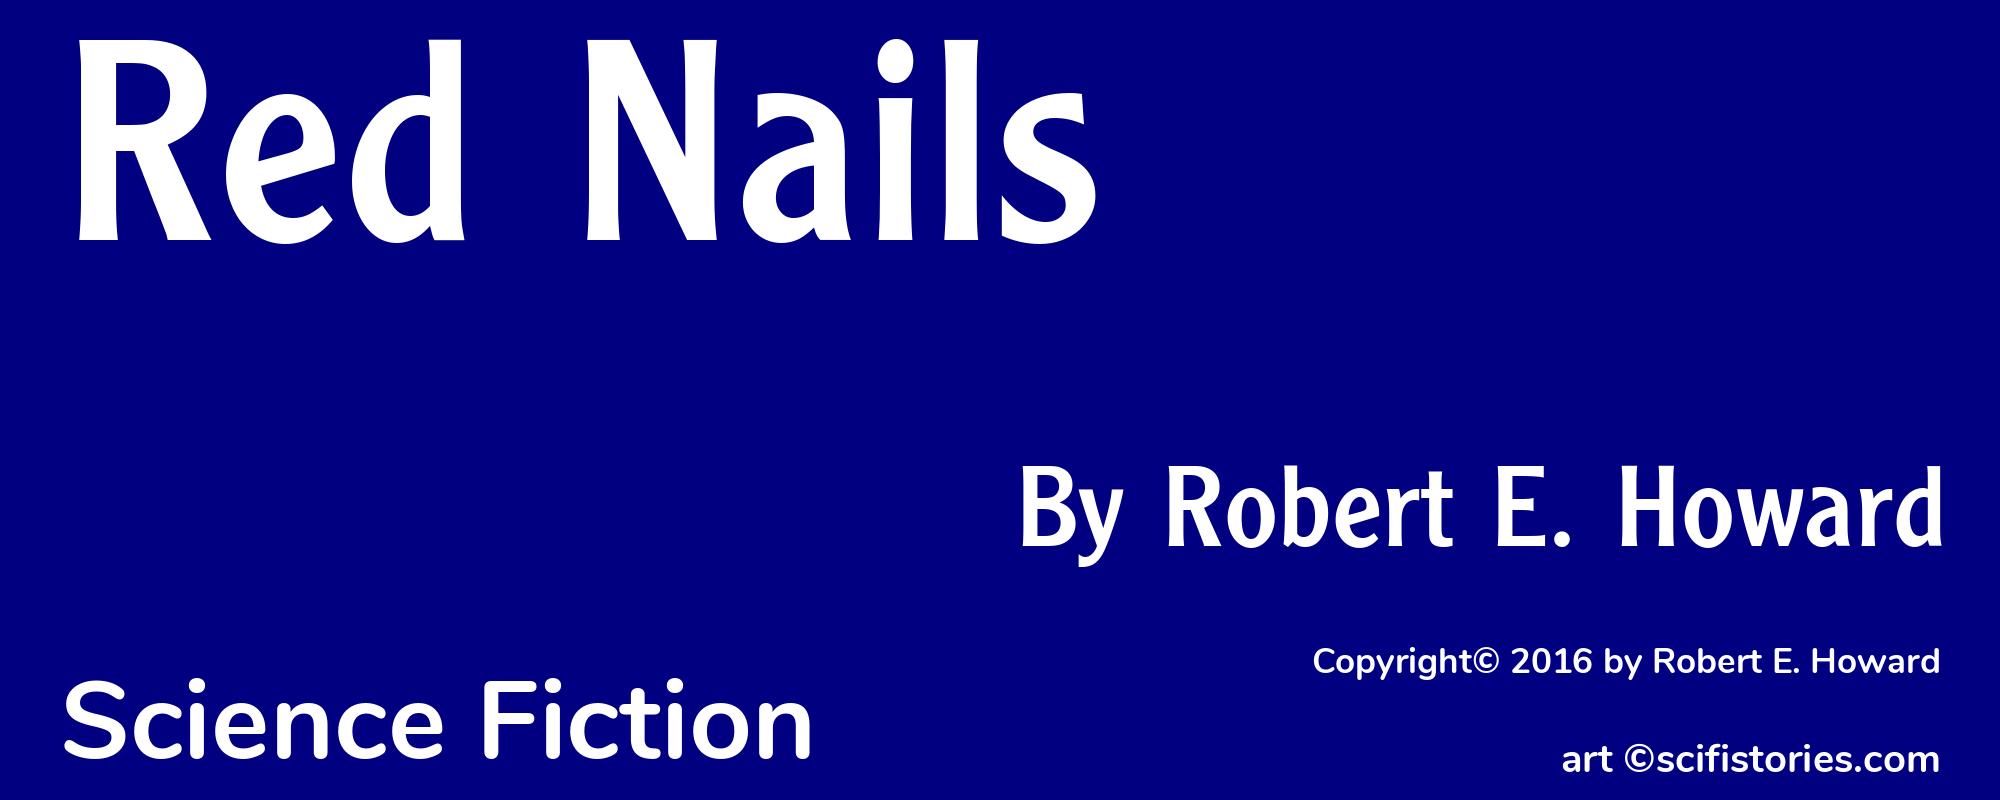 Red Nails - Cover